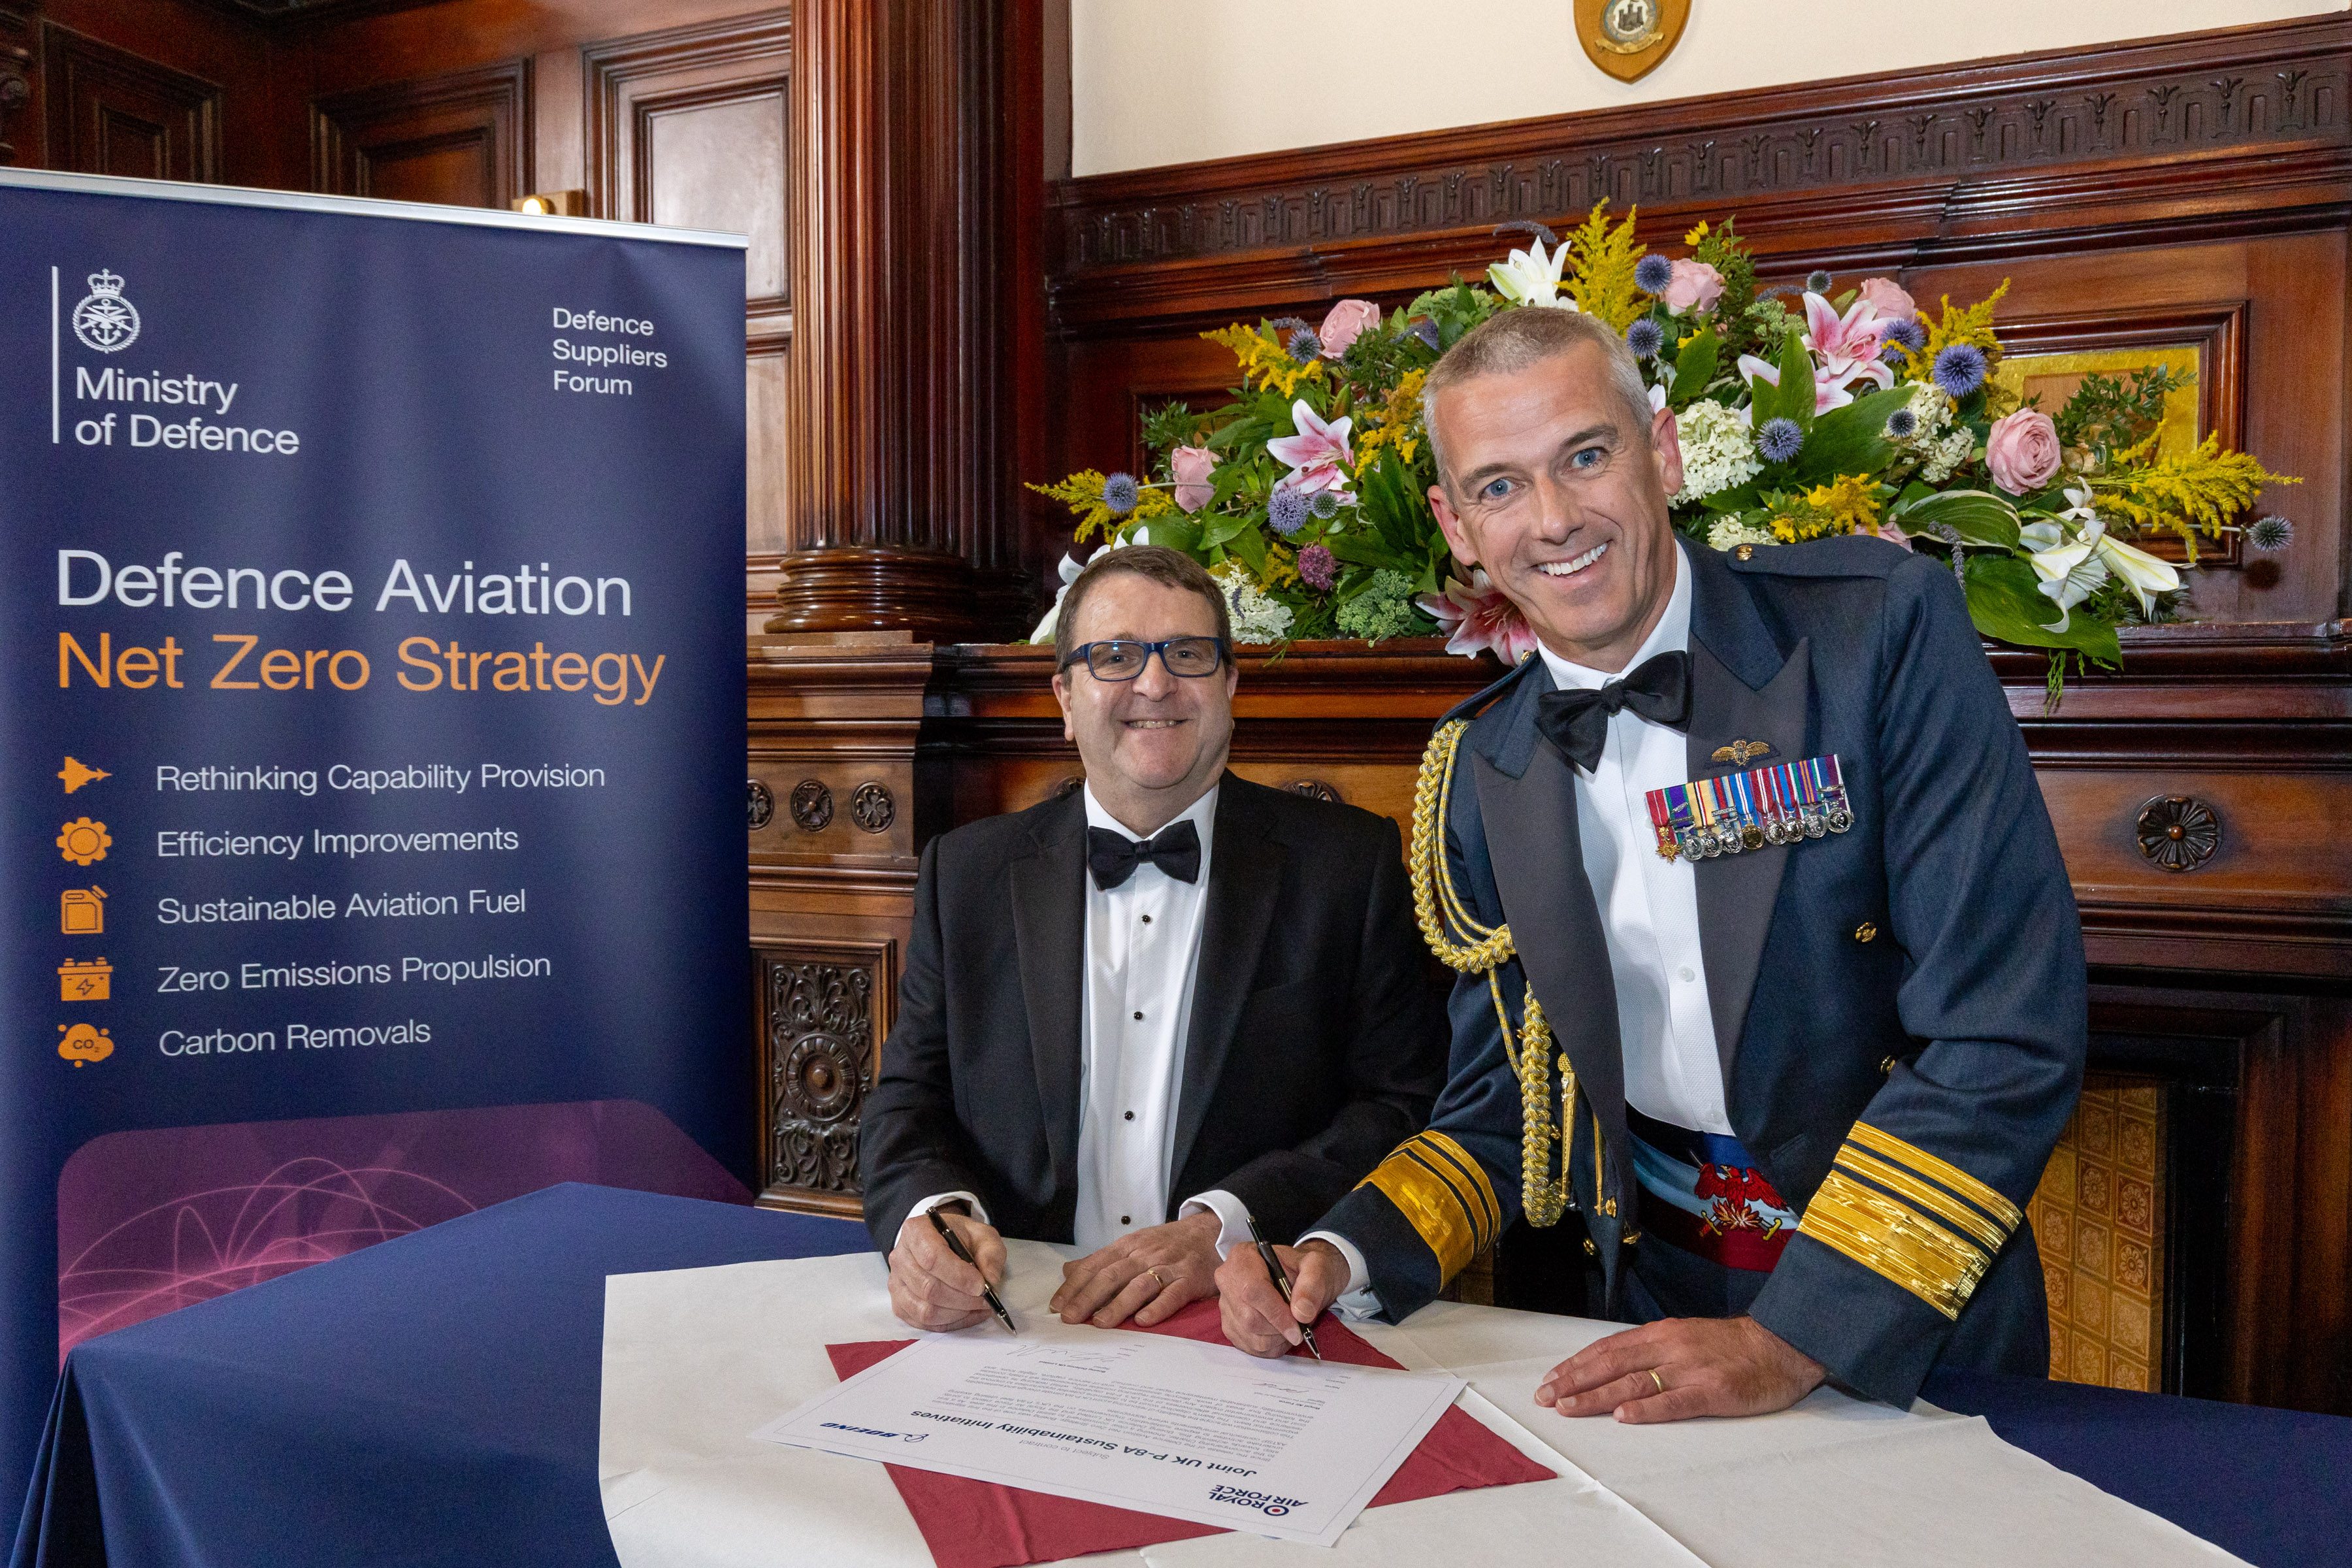 RAF and Boeing signing the document